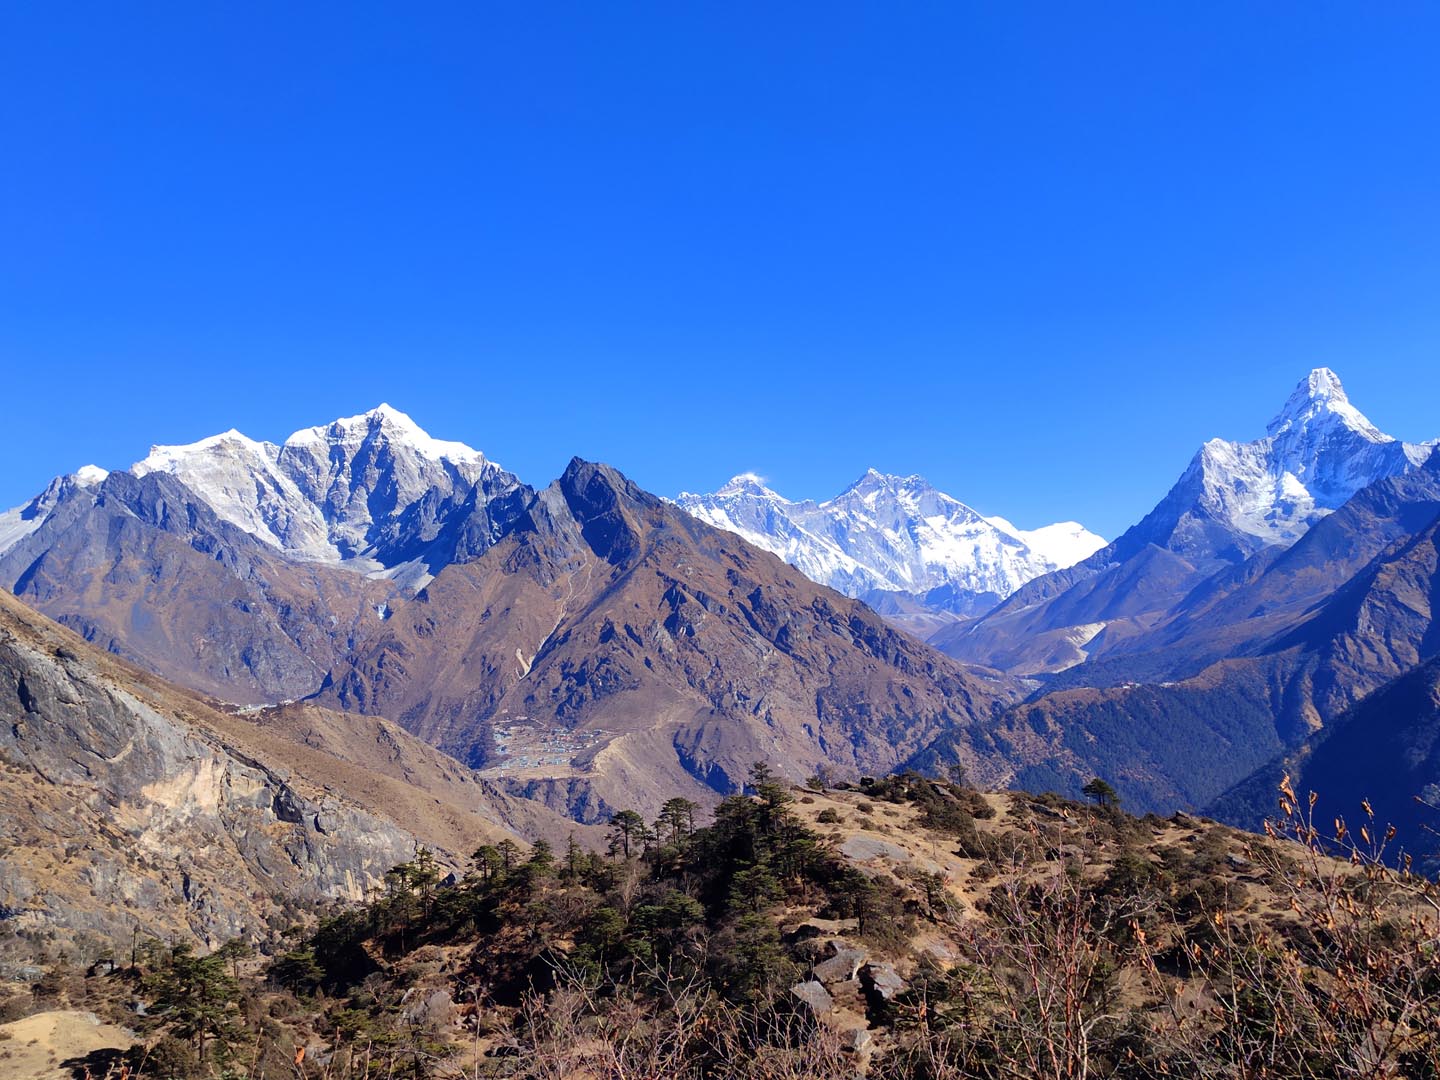 View of Mount Everest, Lhotse and Amadablam from Hotel Everest View